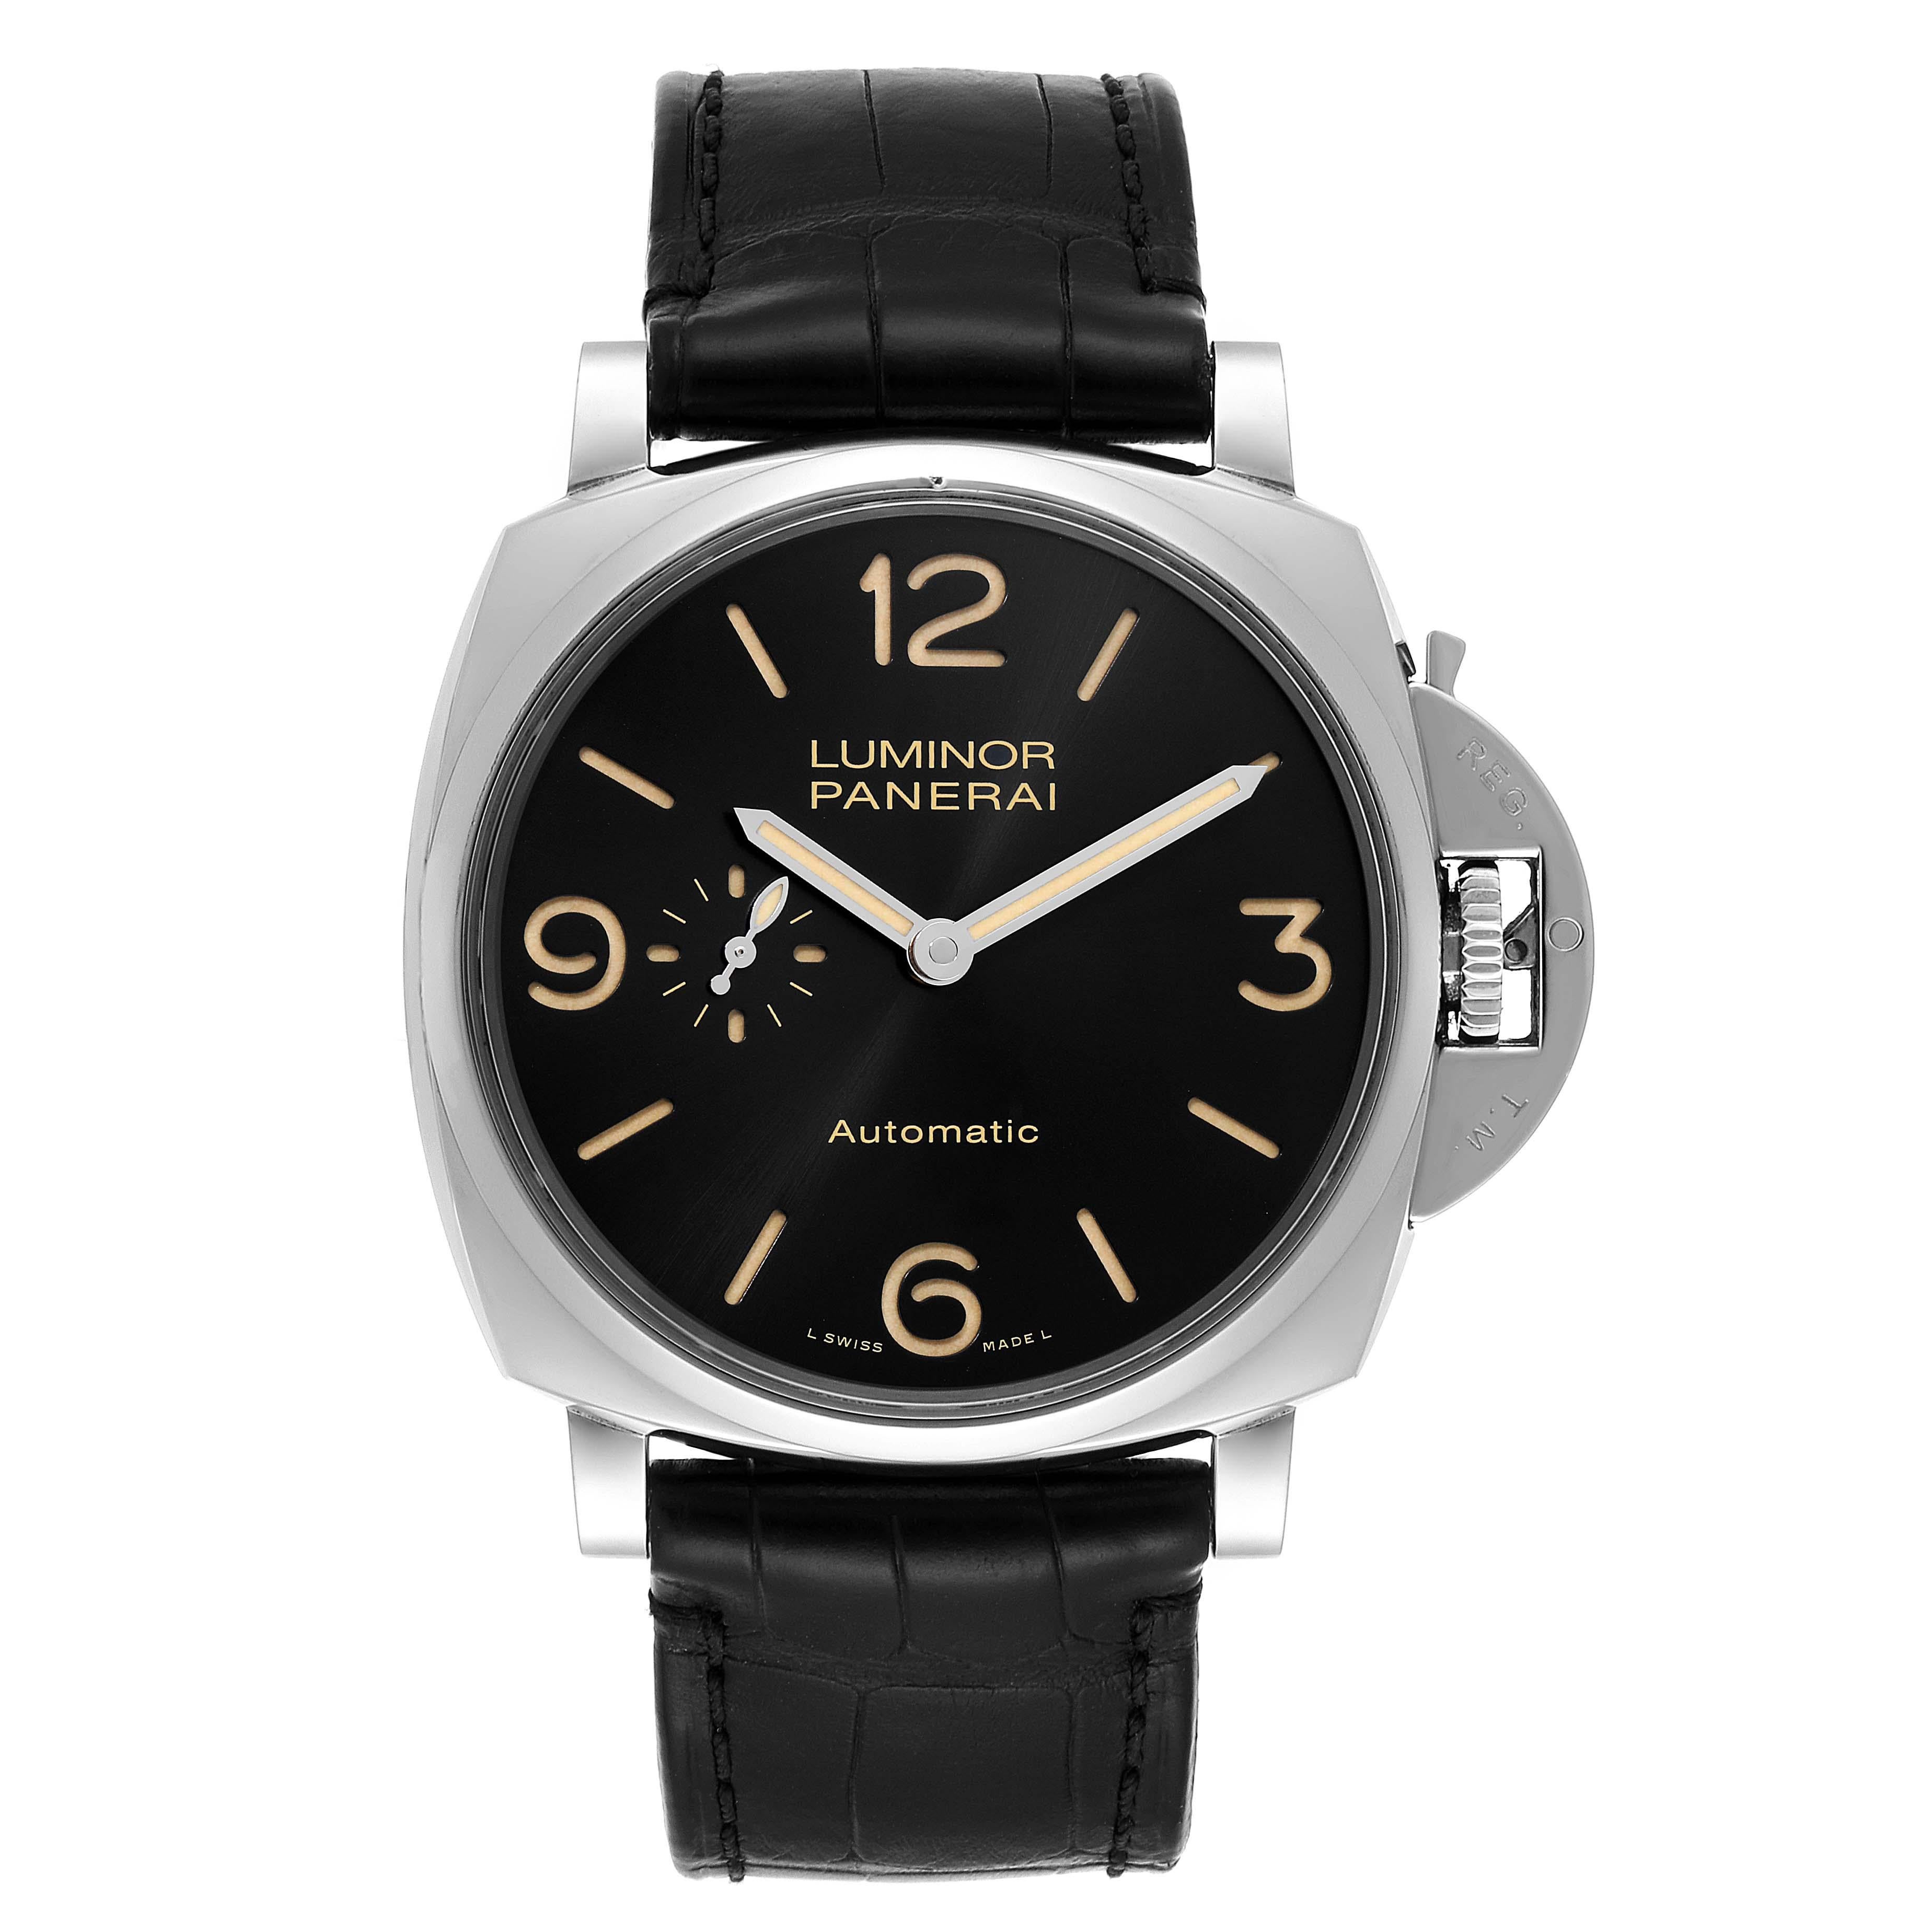 Panerai Luminor Due 3 Days 45mm Mens Watch PAM00674 Box Papers. Automatic self-winding movement. Two part cushion shaped steel case 45.0 mm in diameter. Exhibition sapphire crystal case back. Panerai patented crown protector. Steel sloped polished